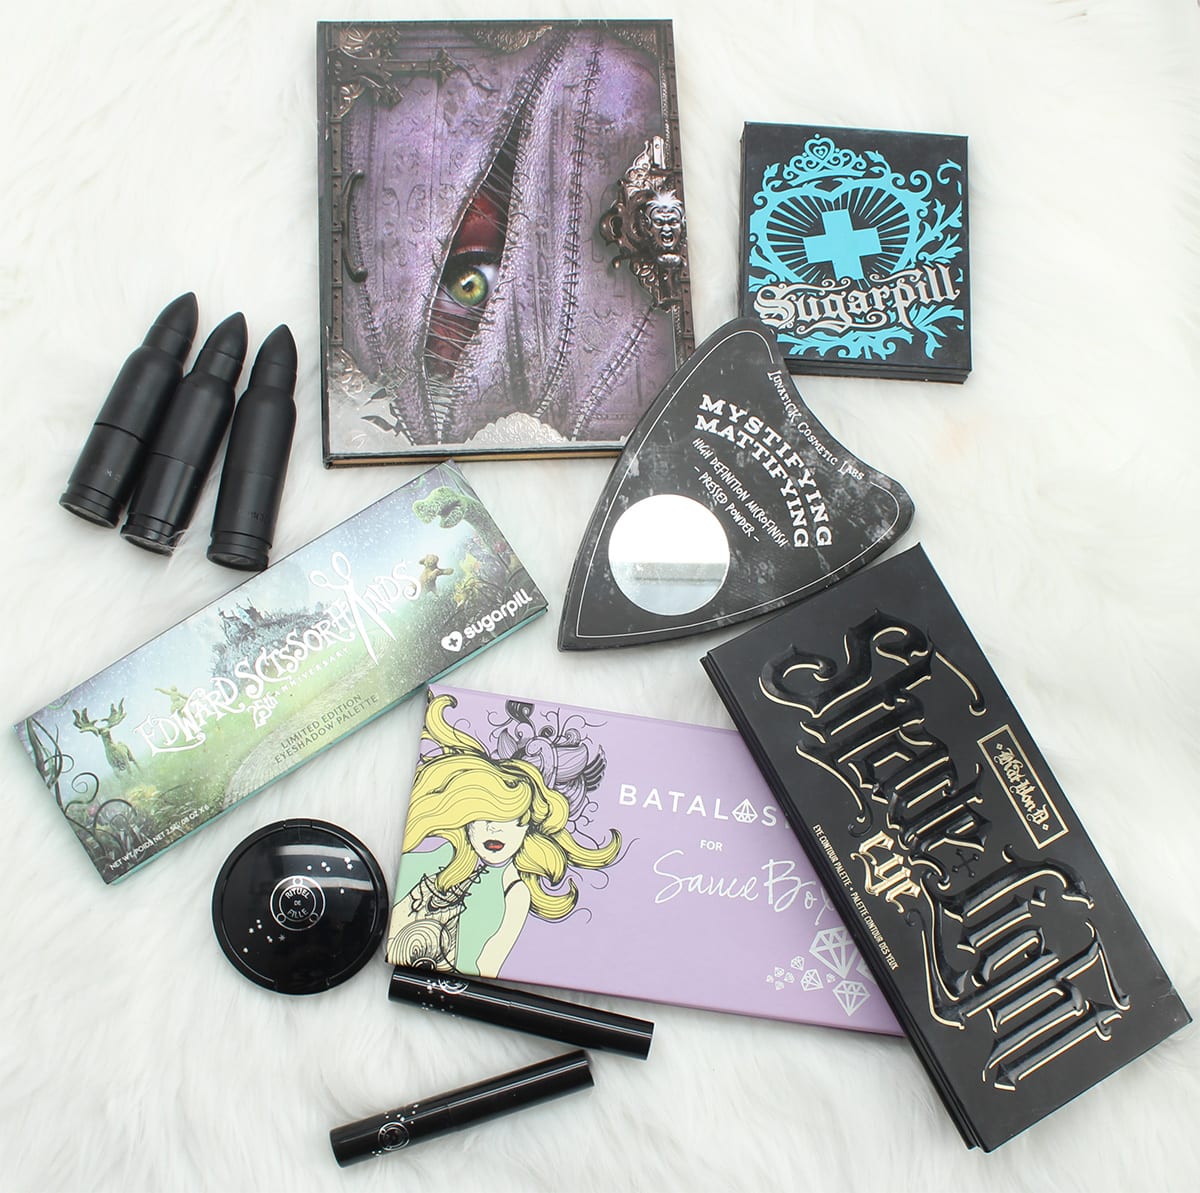 Best Gothic Makeup Brands to Try Now.